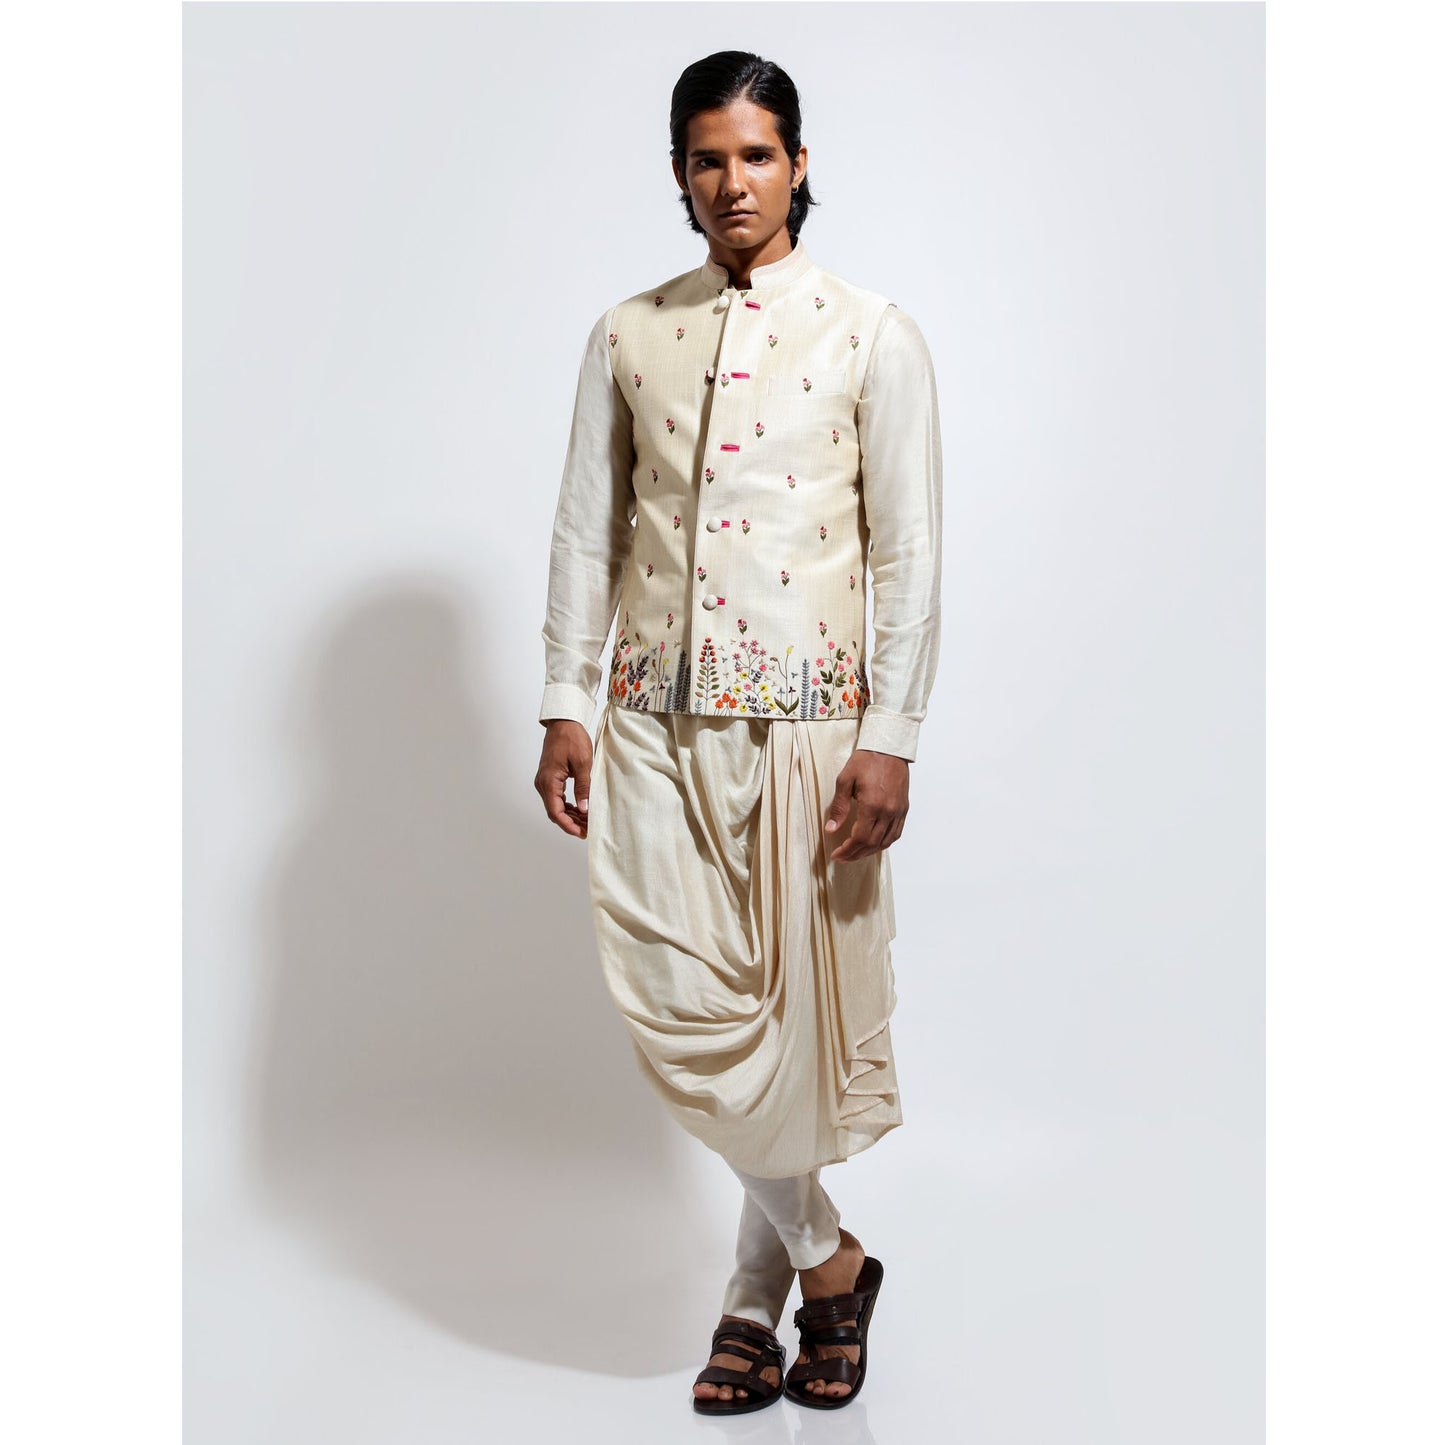 Sleeveless bandi with multicolor floral embroidery layered over cowl kurta